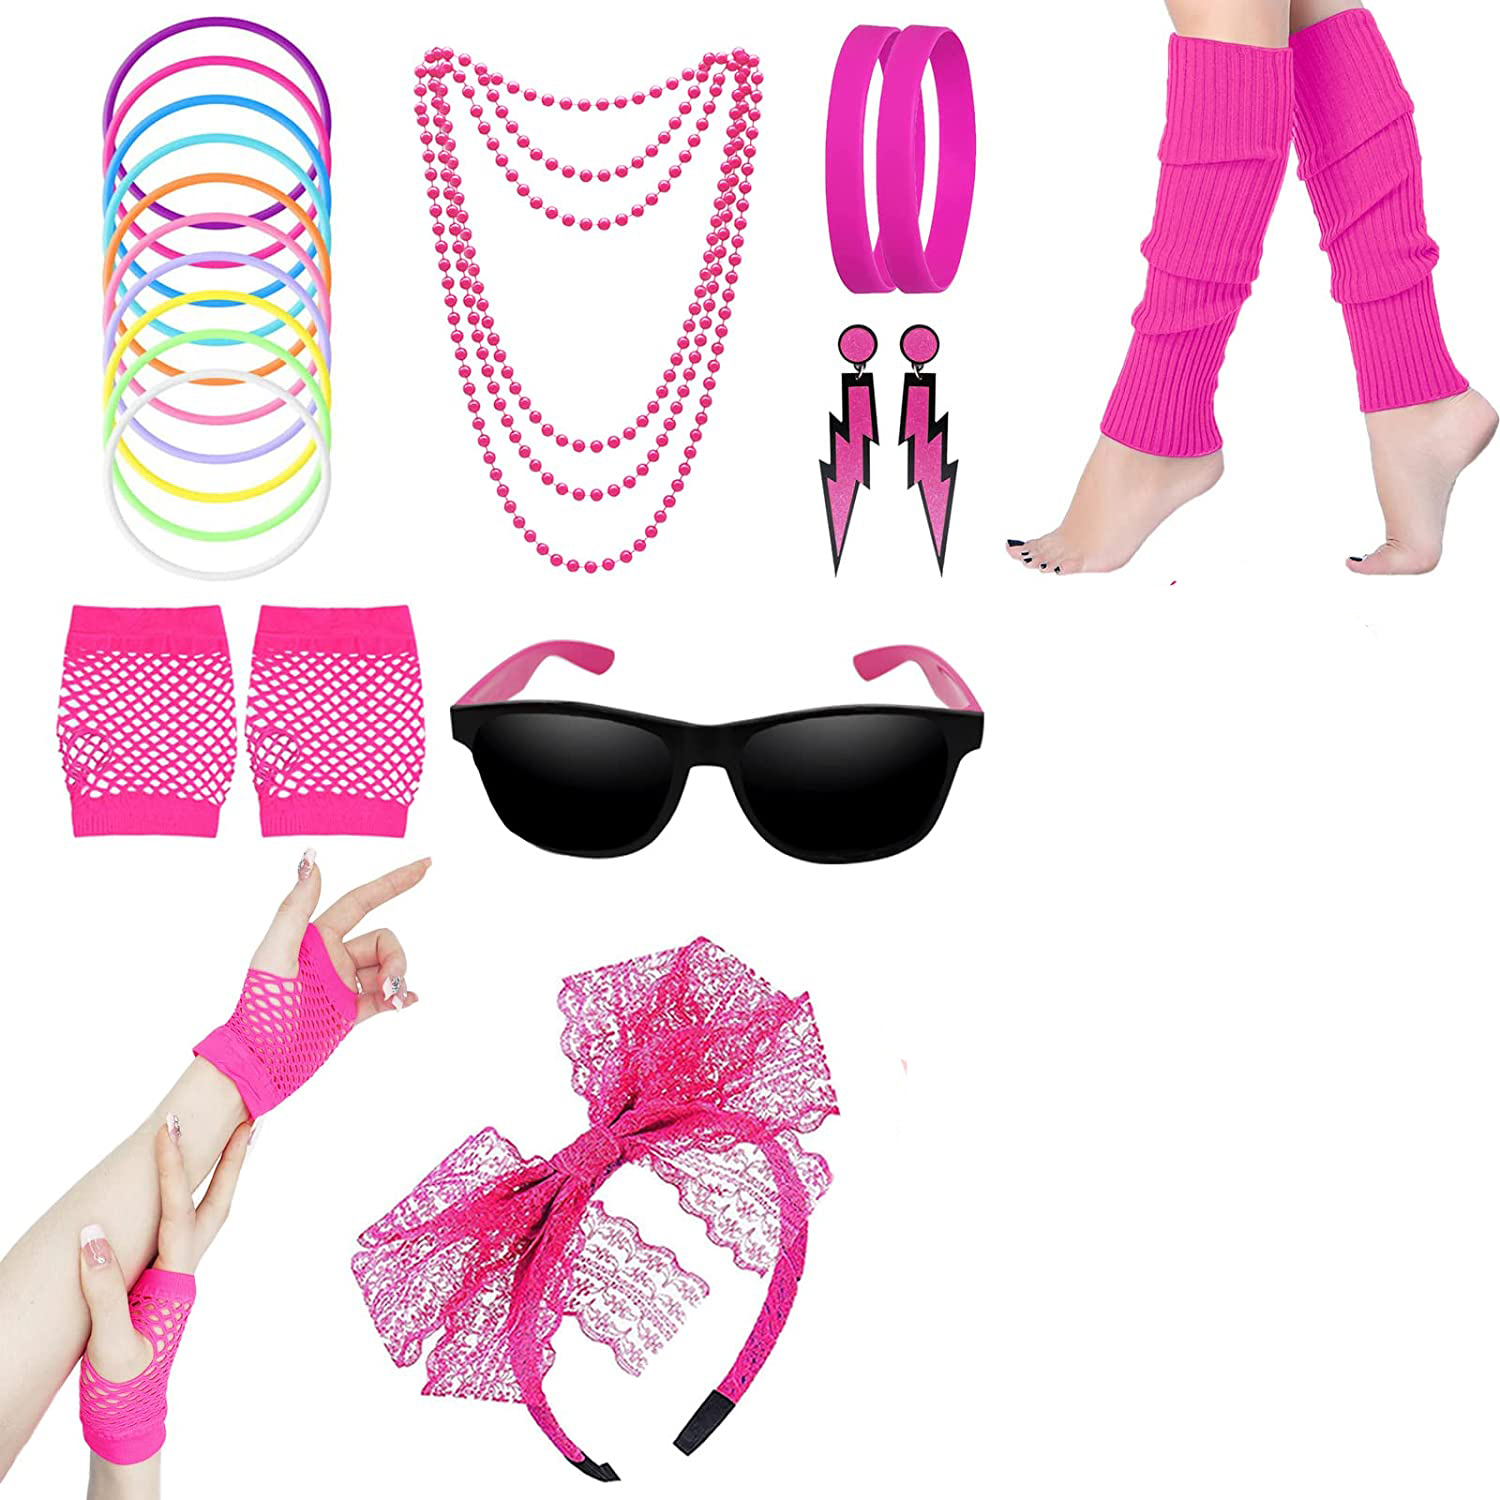 Fashion trends of the 80's  80s fashion party, 80s party outfits